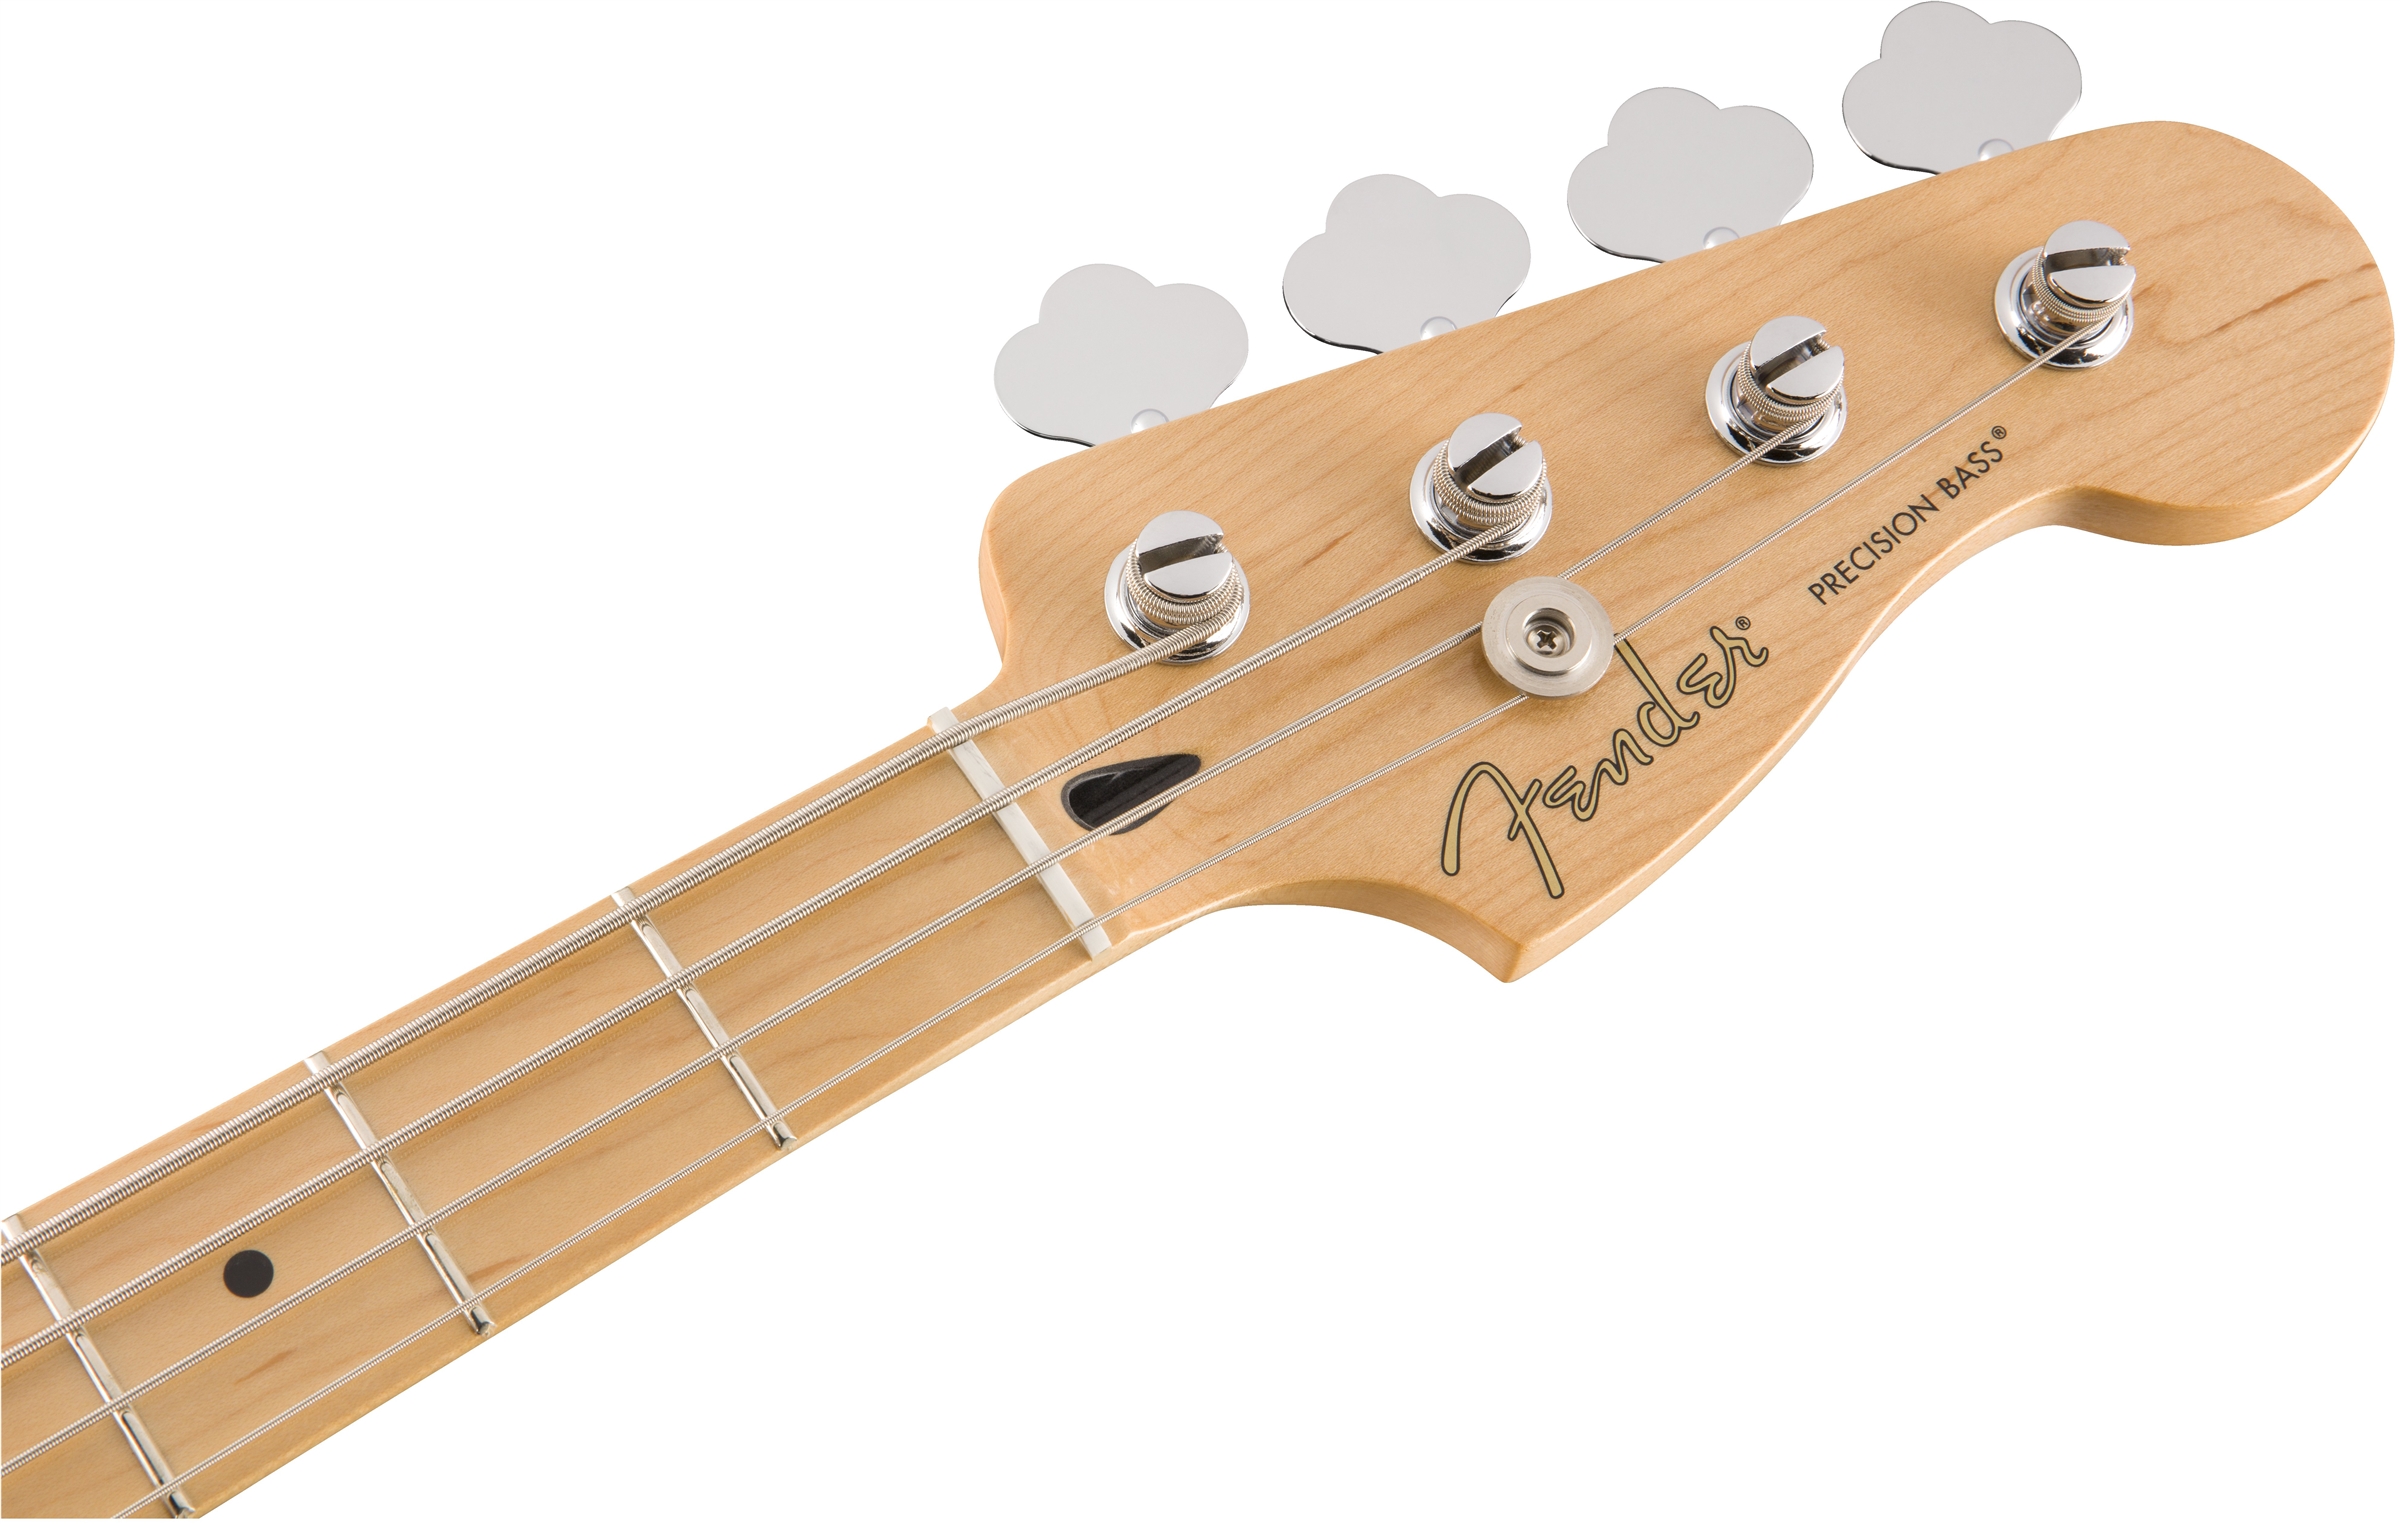 Fender Precision Bass Player Mex Mn - Buttercream - Solid body electric bass - Variation 4